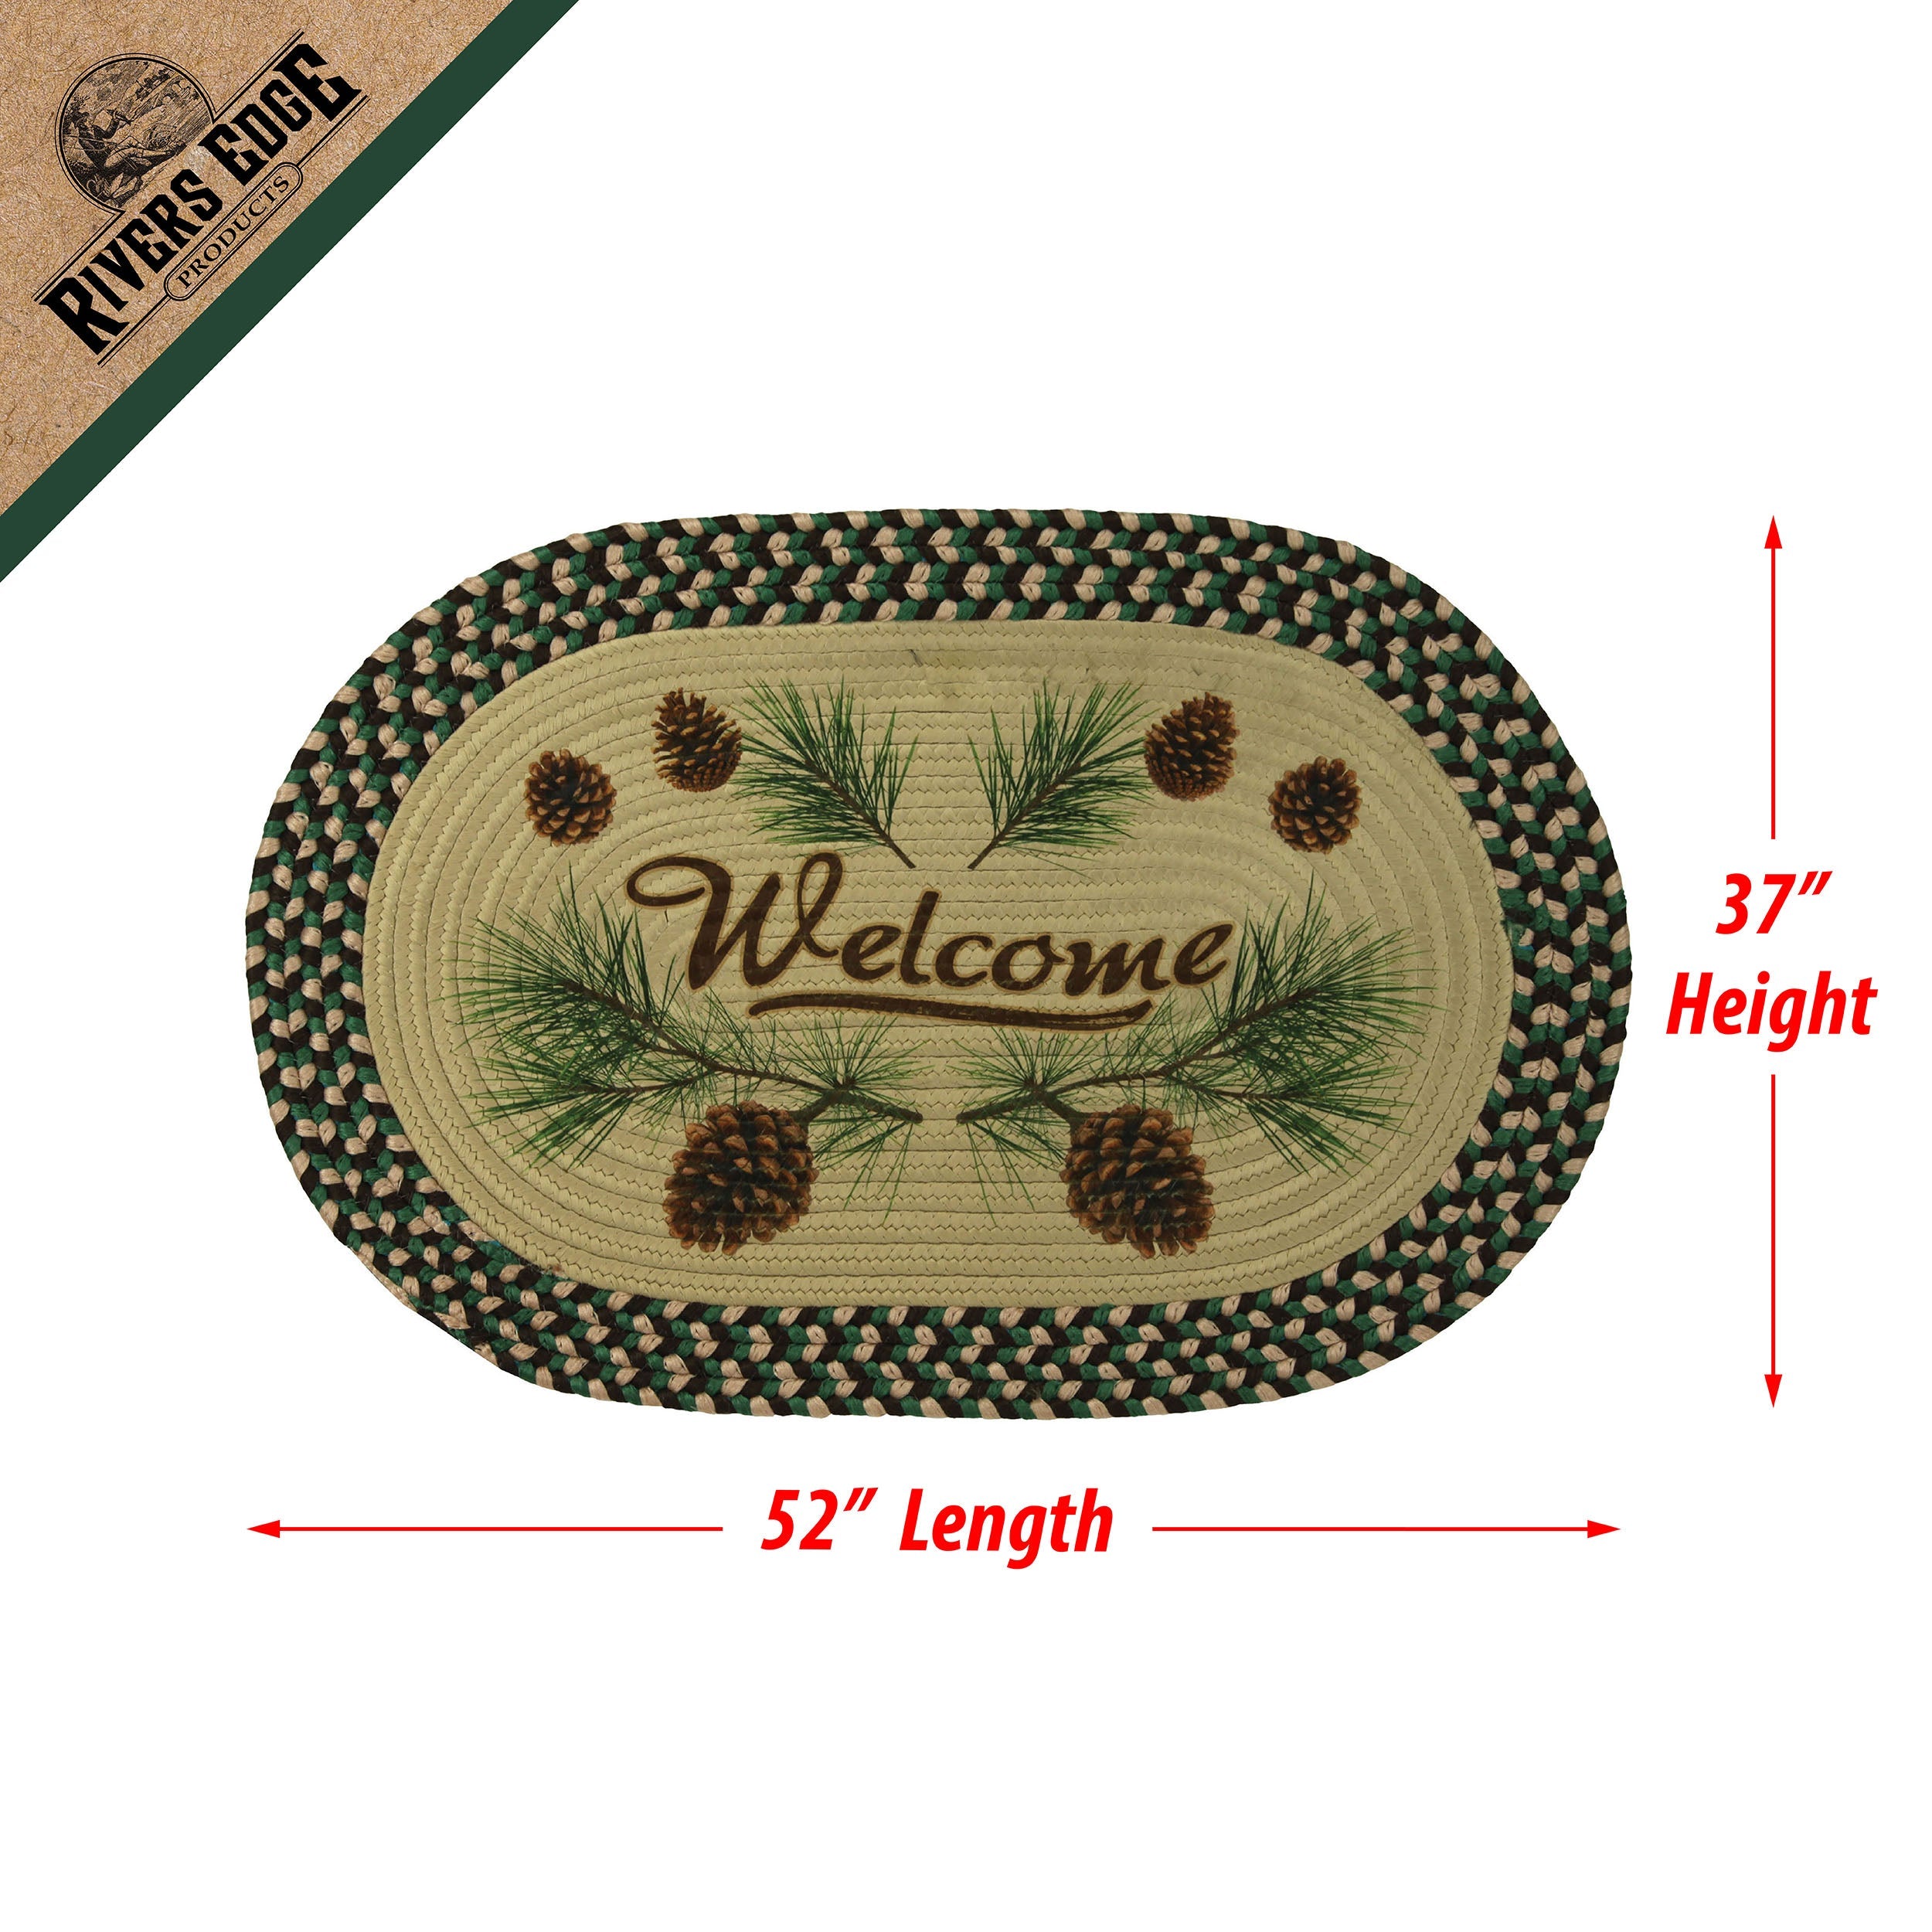 Moose and Pinecones Oval Jute Rug